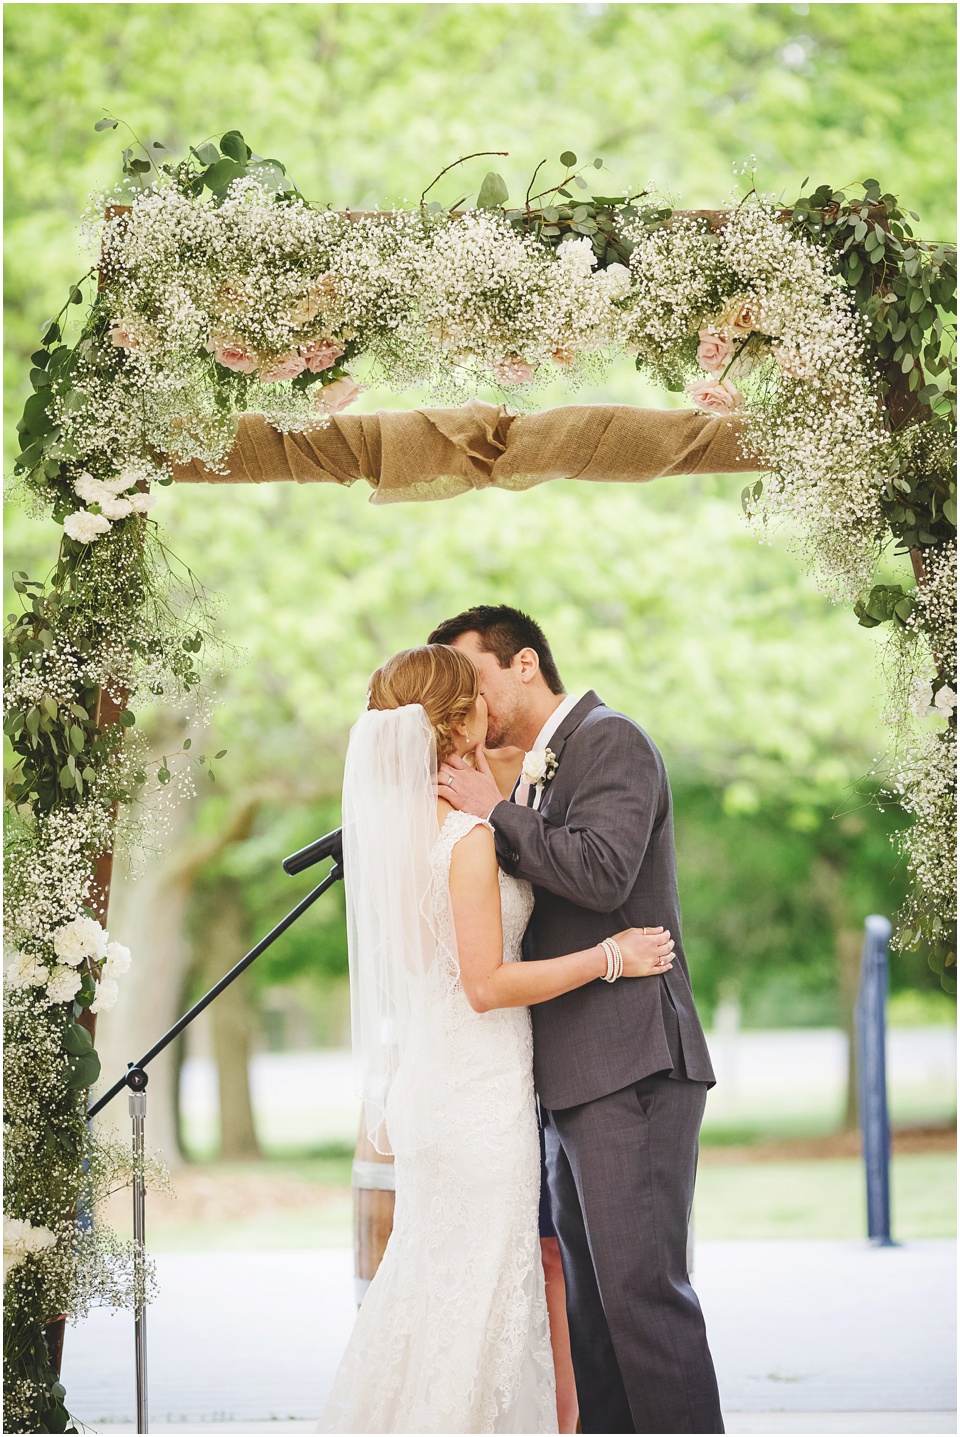 Bride and grooms first kiss at Kickapoo Creek Winery Pavillion Wedding Ceremony by Wedding Photographer Rachael Schirano